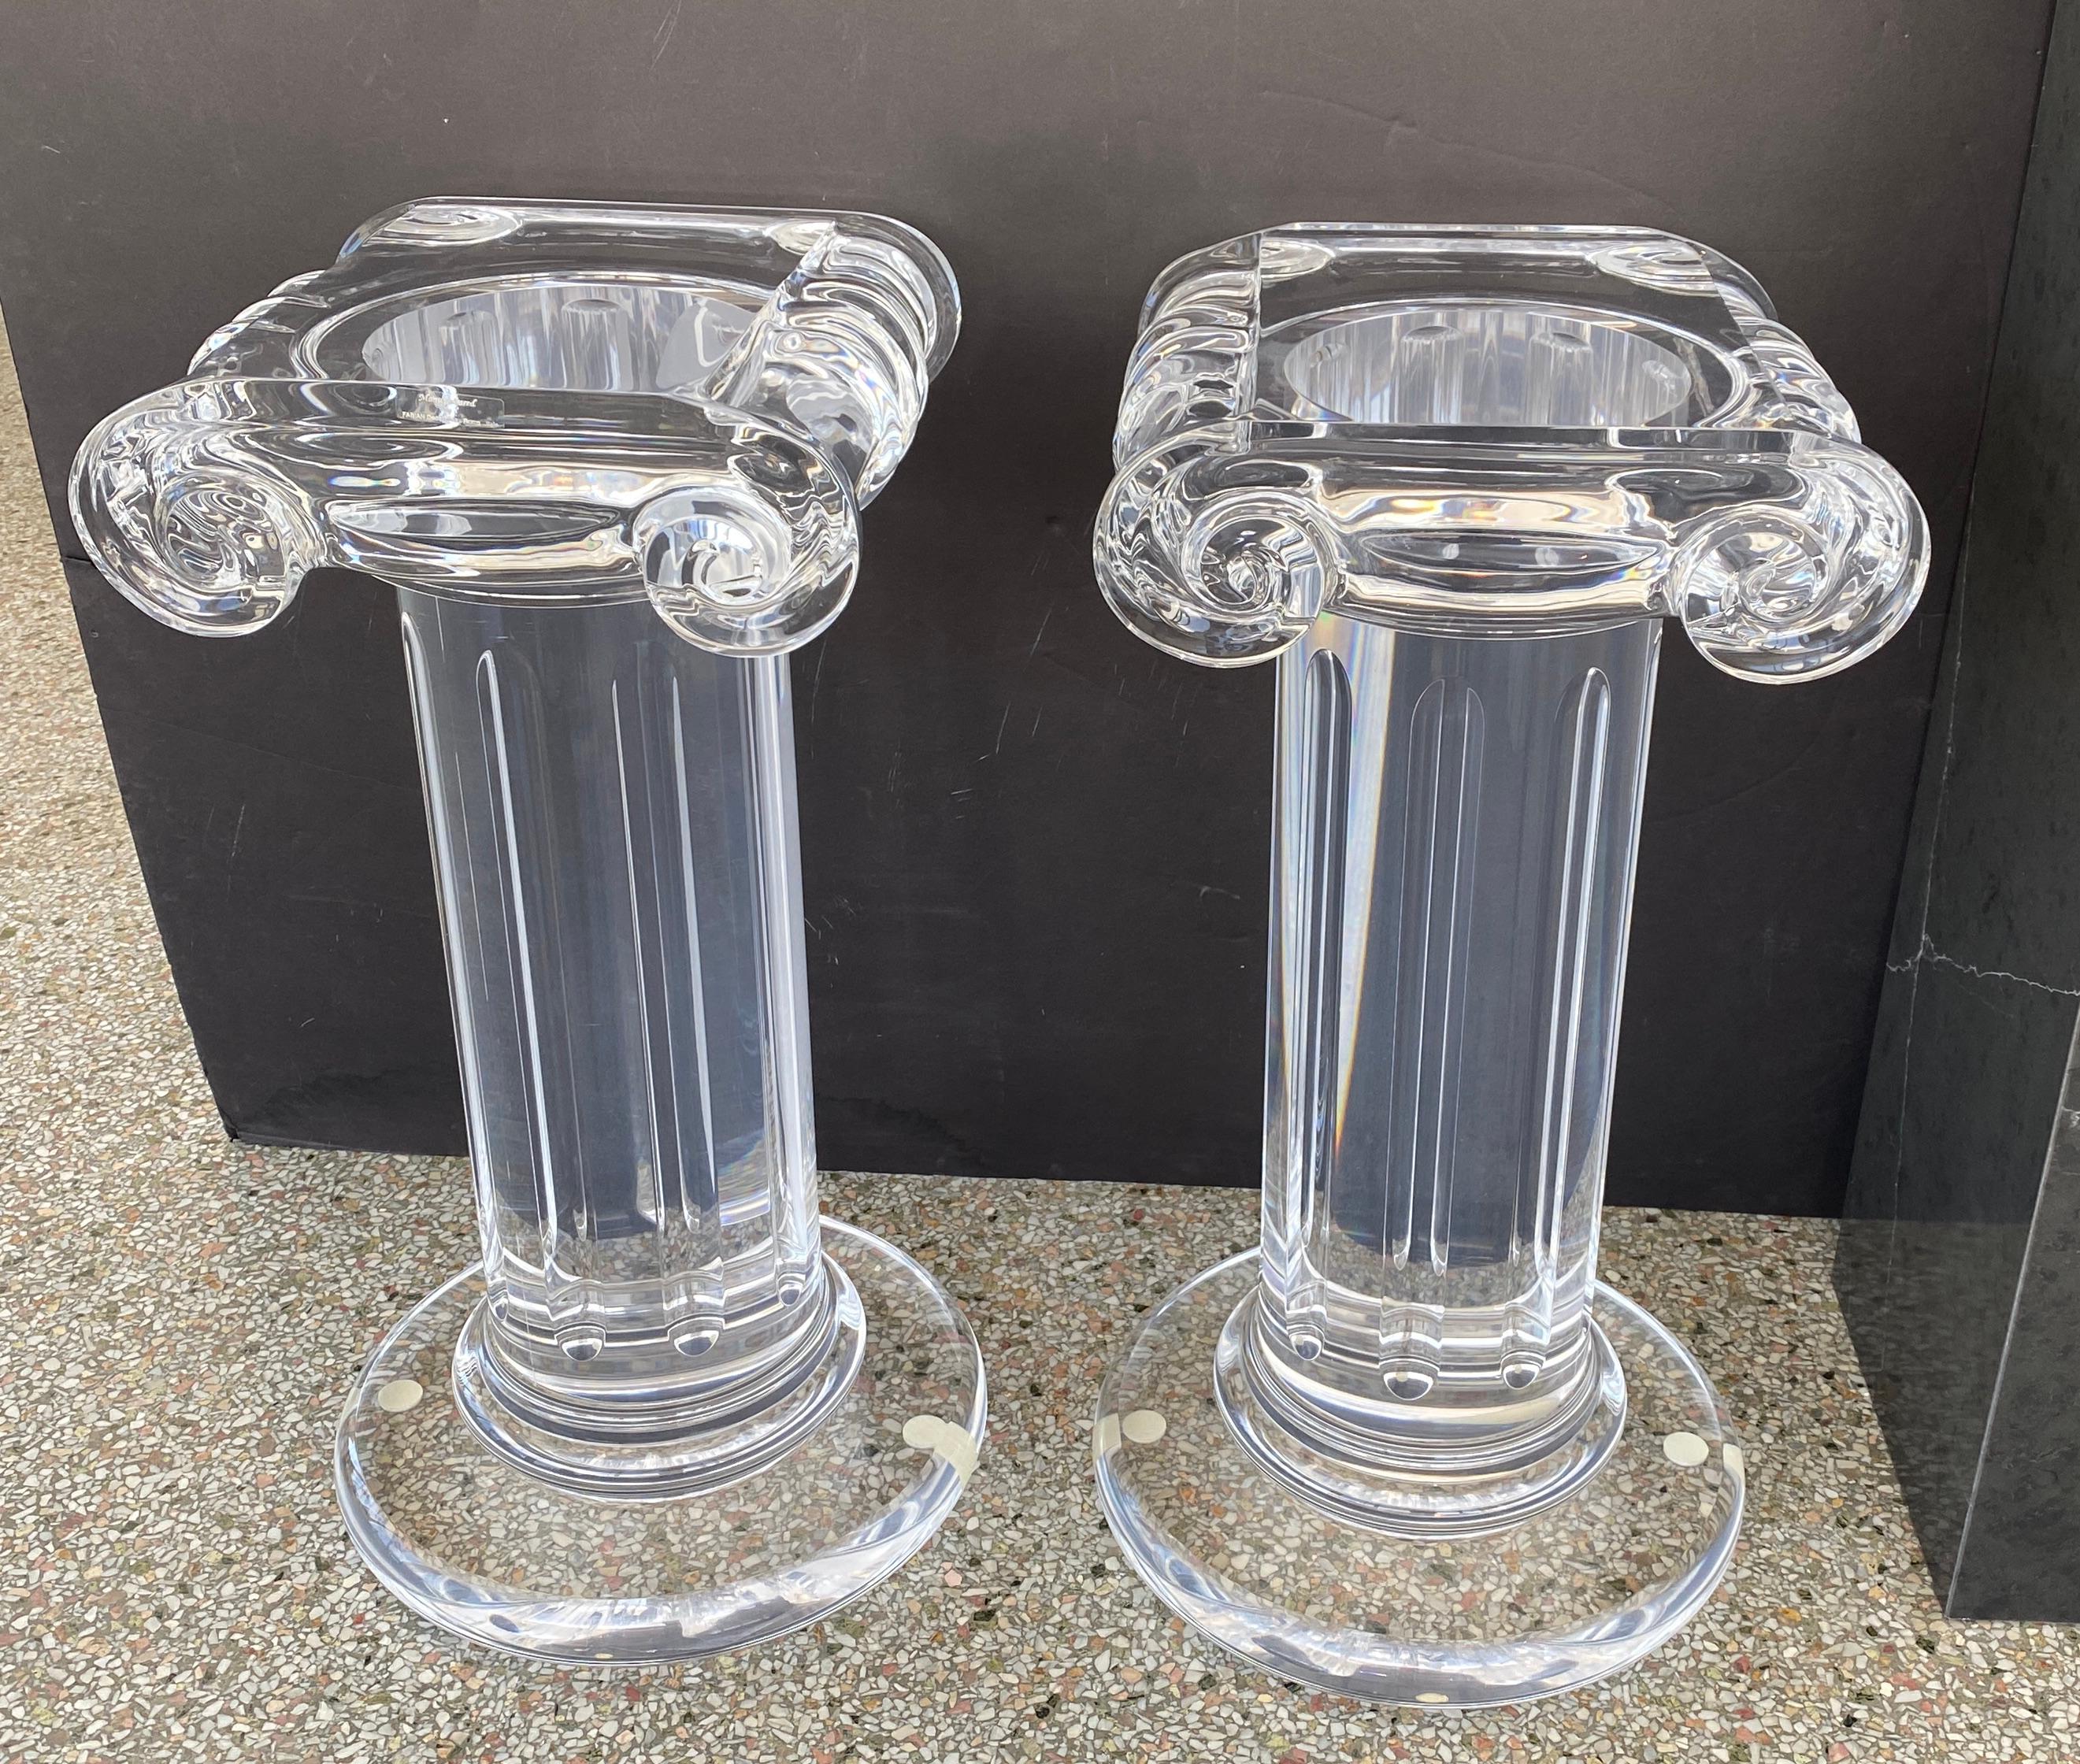 Polished Pair of Classical Style Lucite Pedestals For Sale